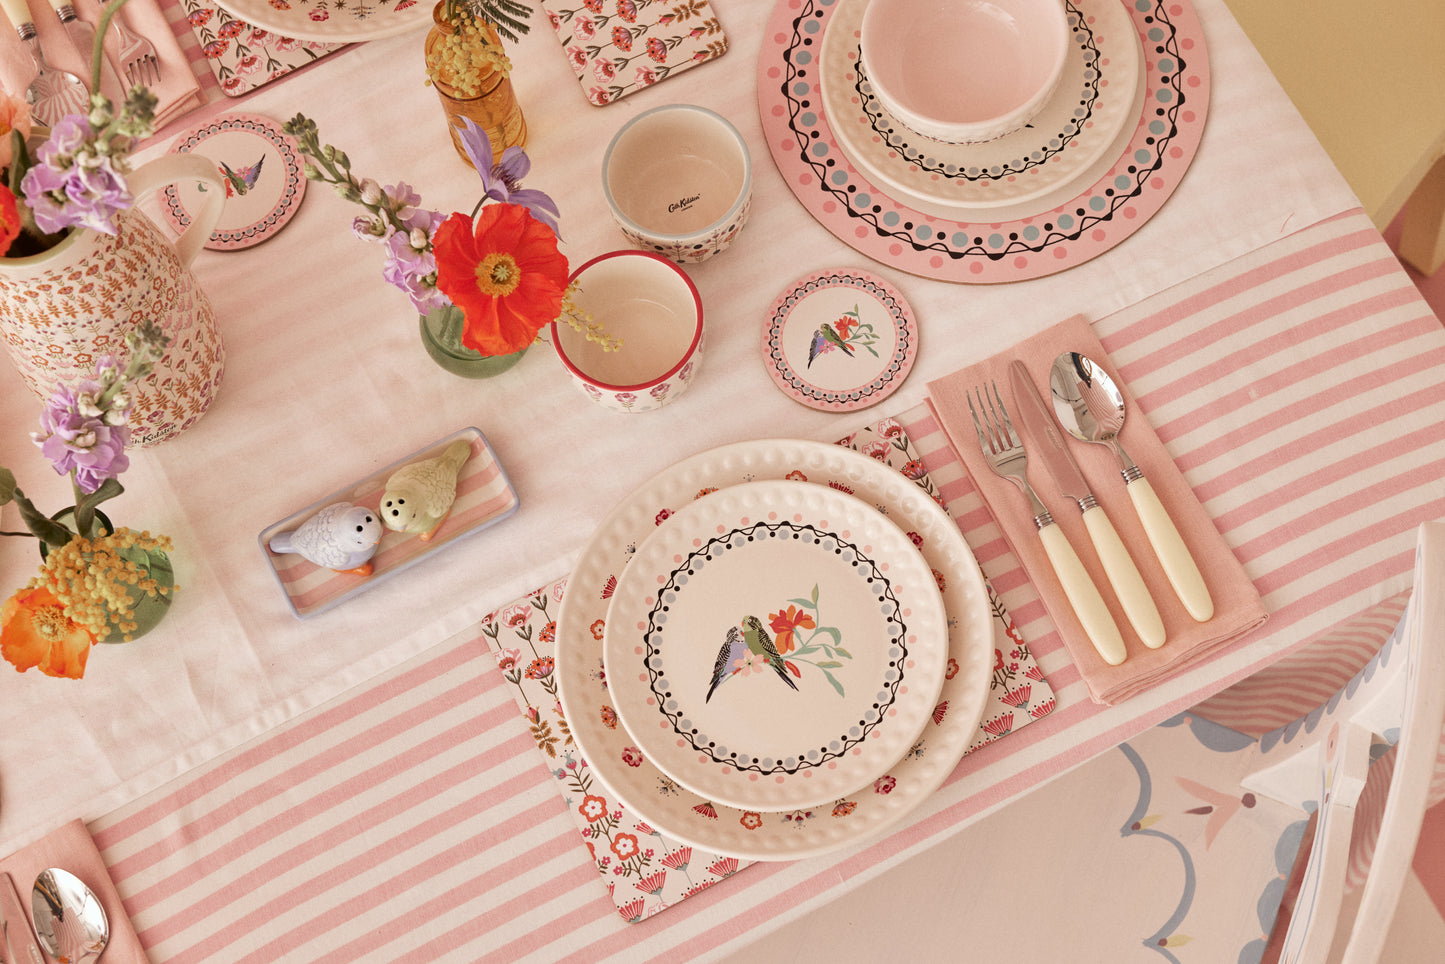 Cath Kidston Painted Table Dinner Plate